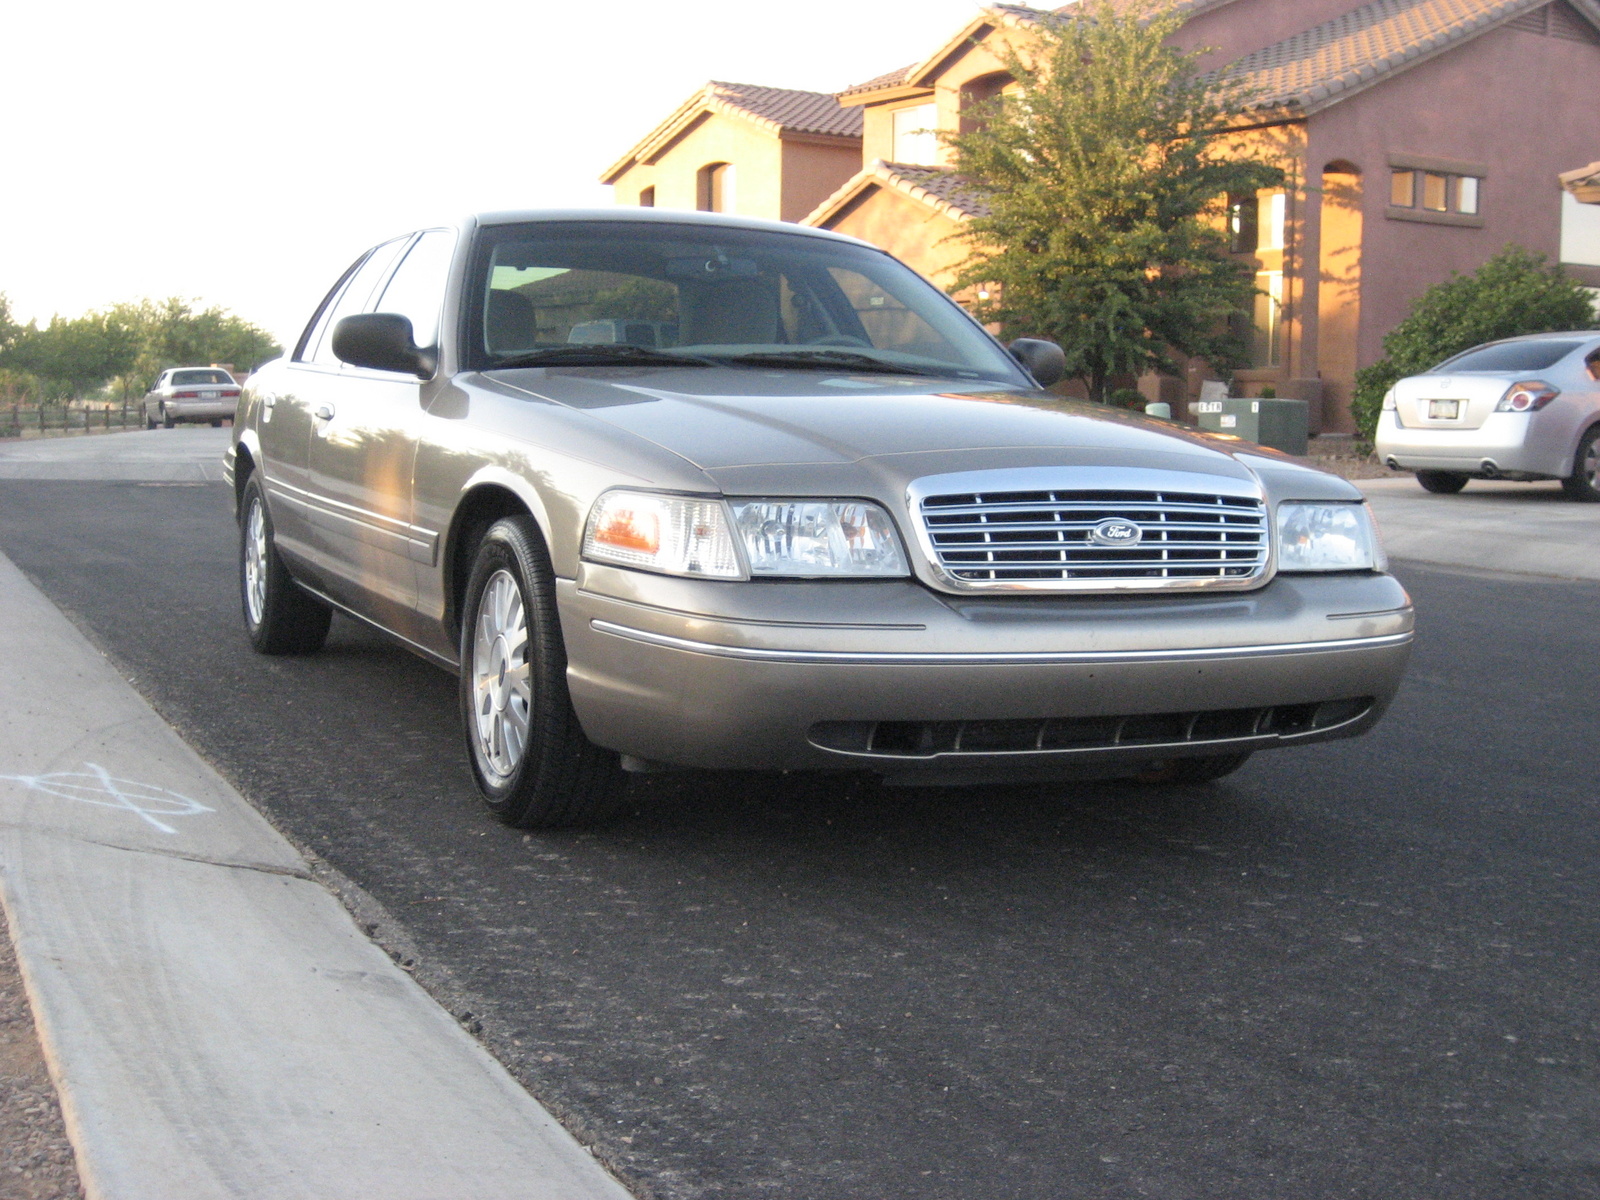 2005 Ford Crown Victoria - Pictures - CarGurus